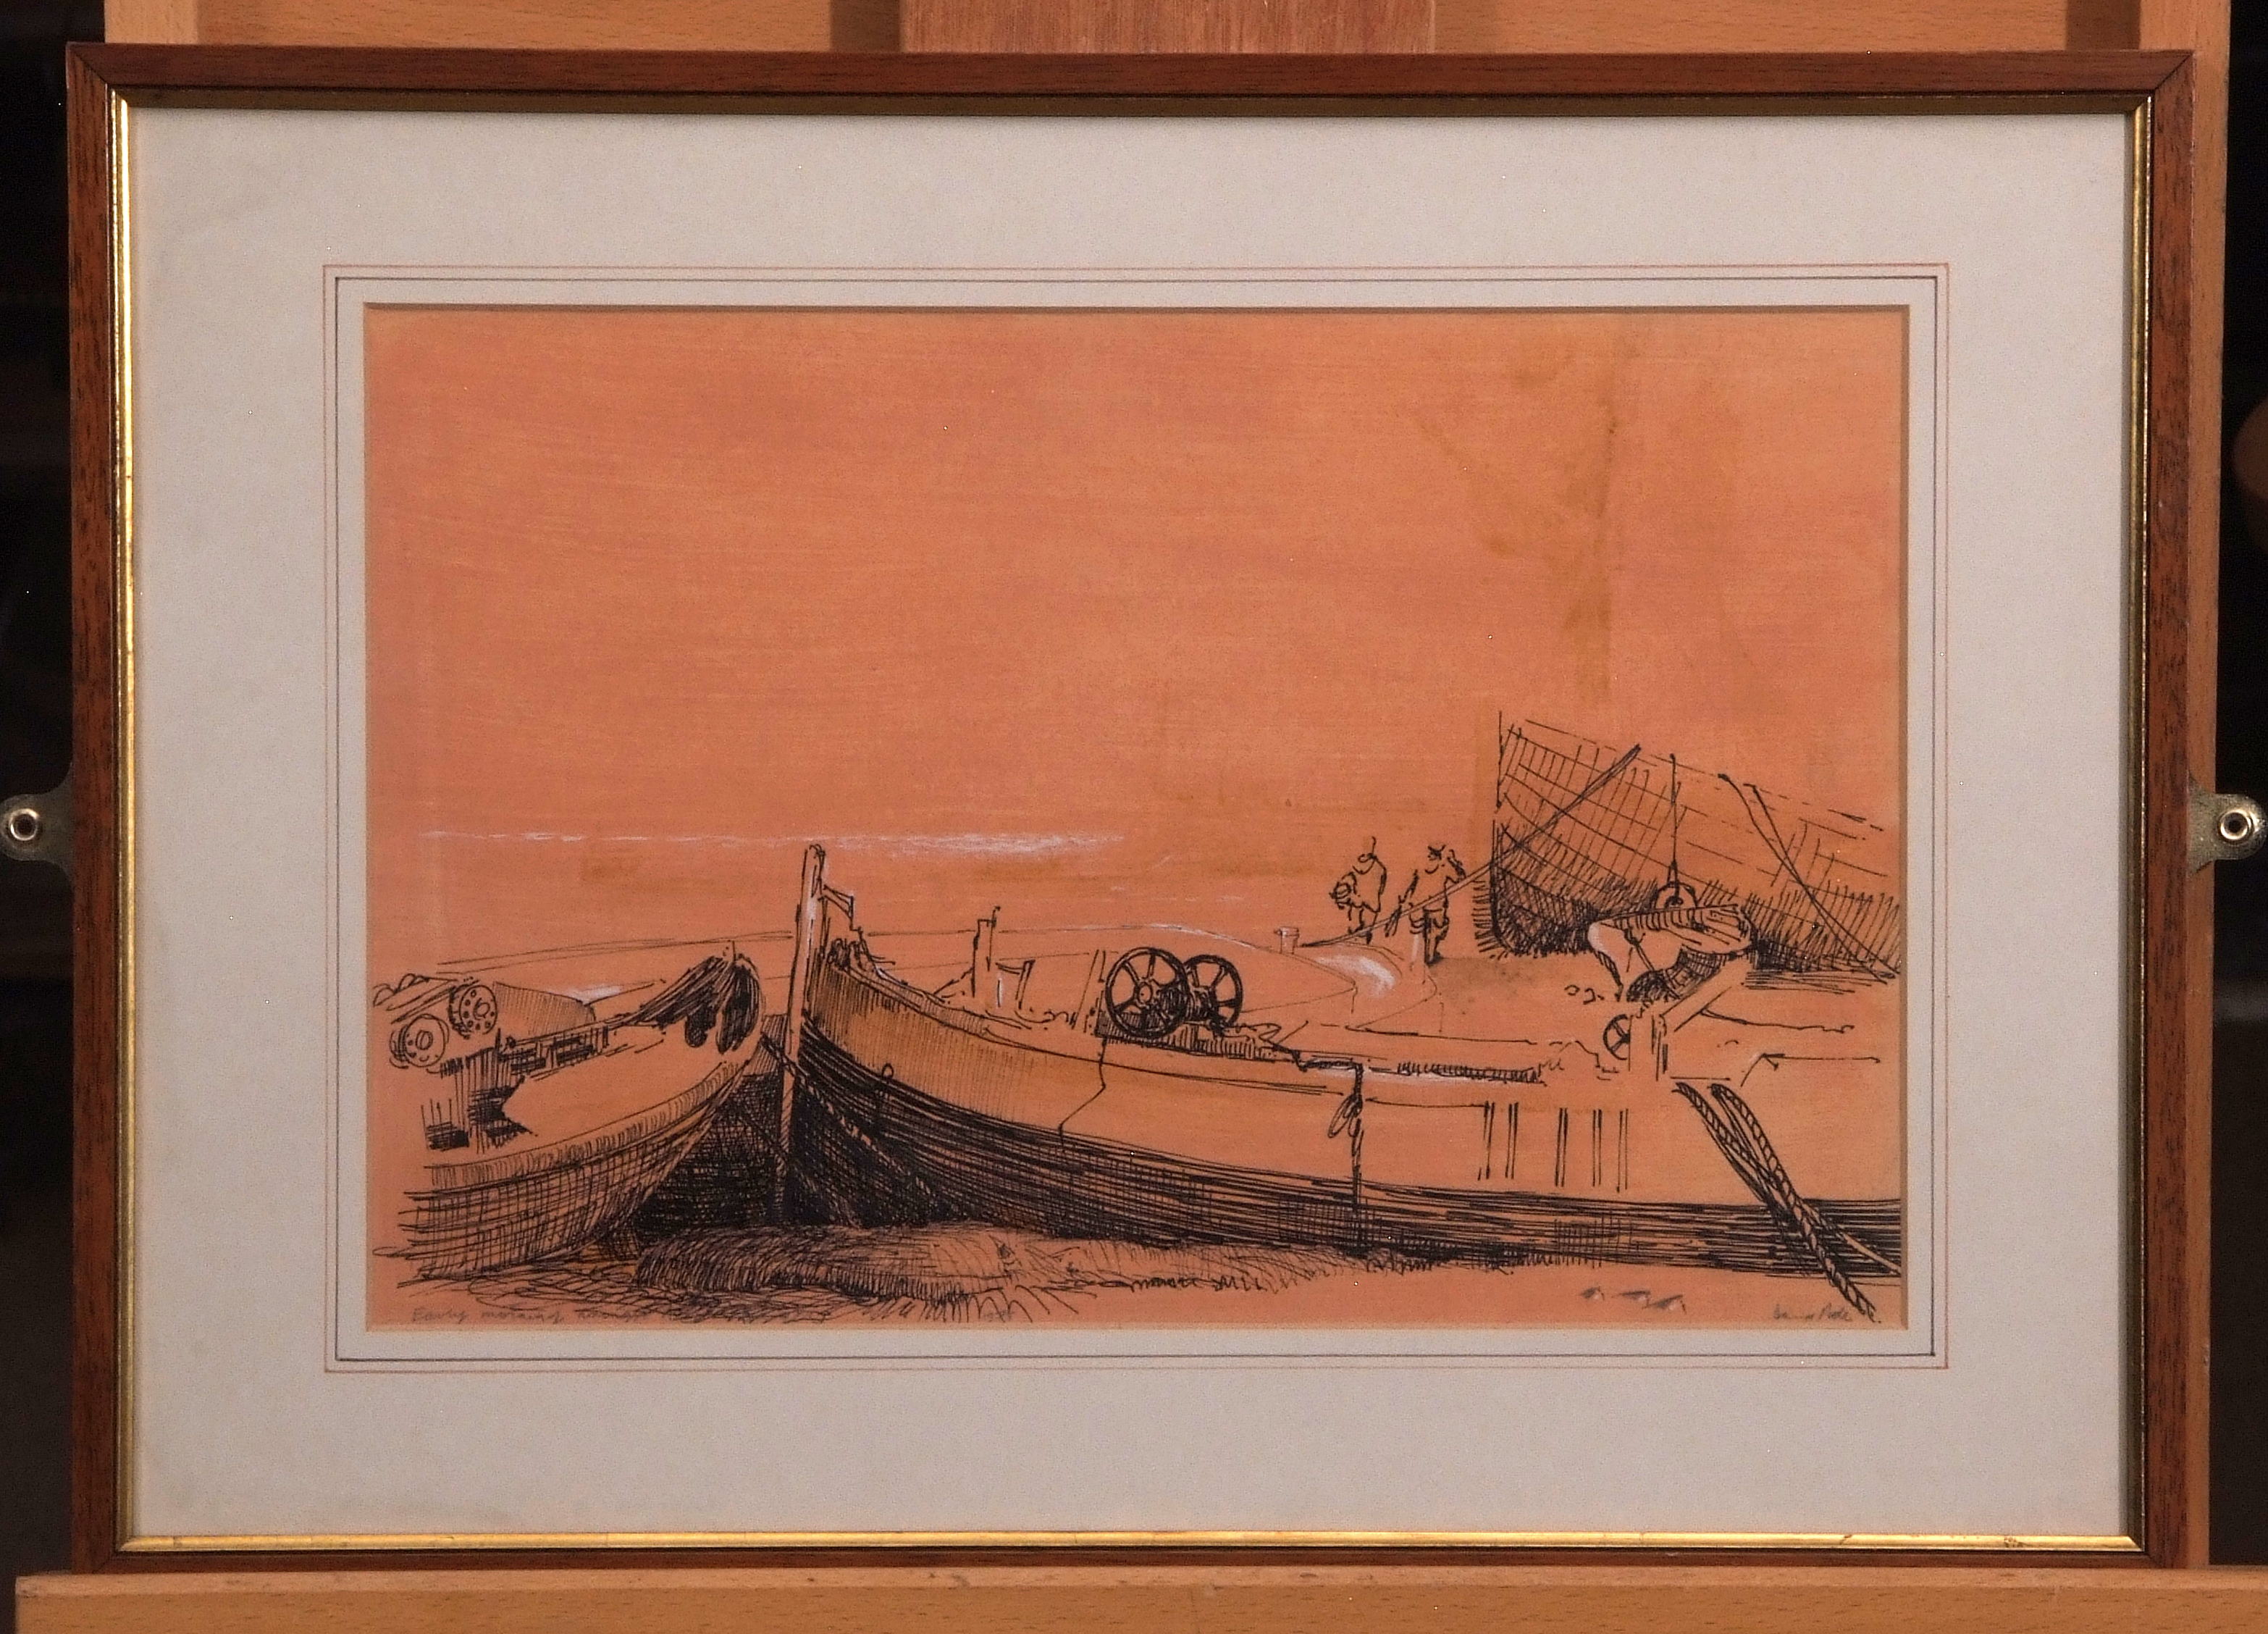 AR David Poole (1936-1995), "Mill Farm, Acle, May 2nd 1973", pencil drawing, signed and inscribed - Image 5 of 6